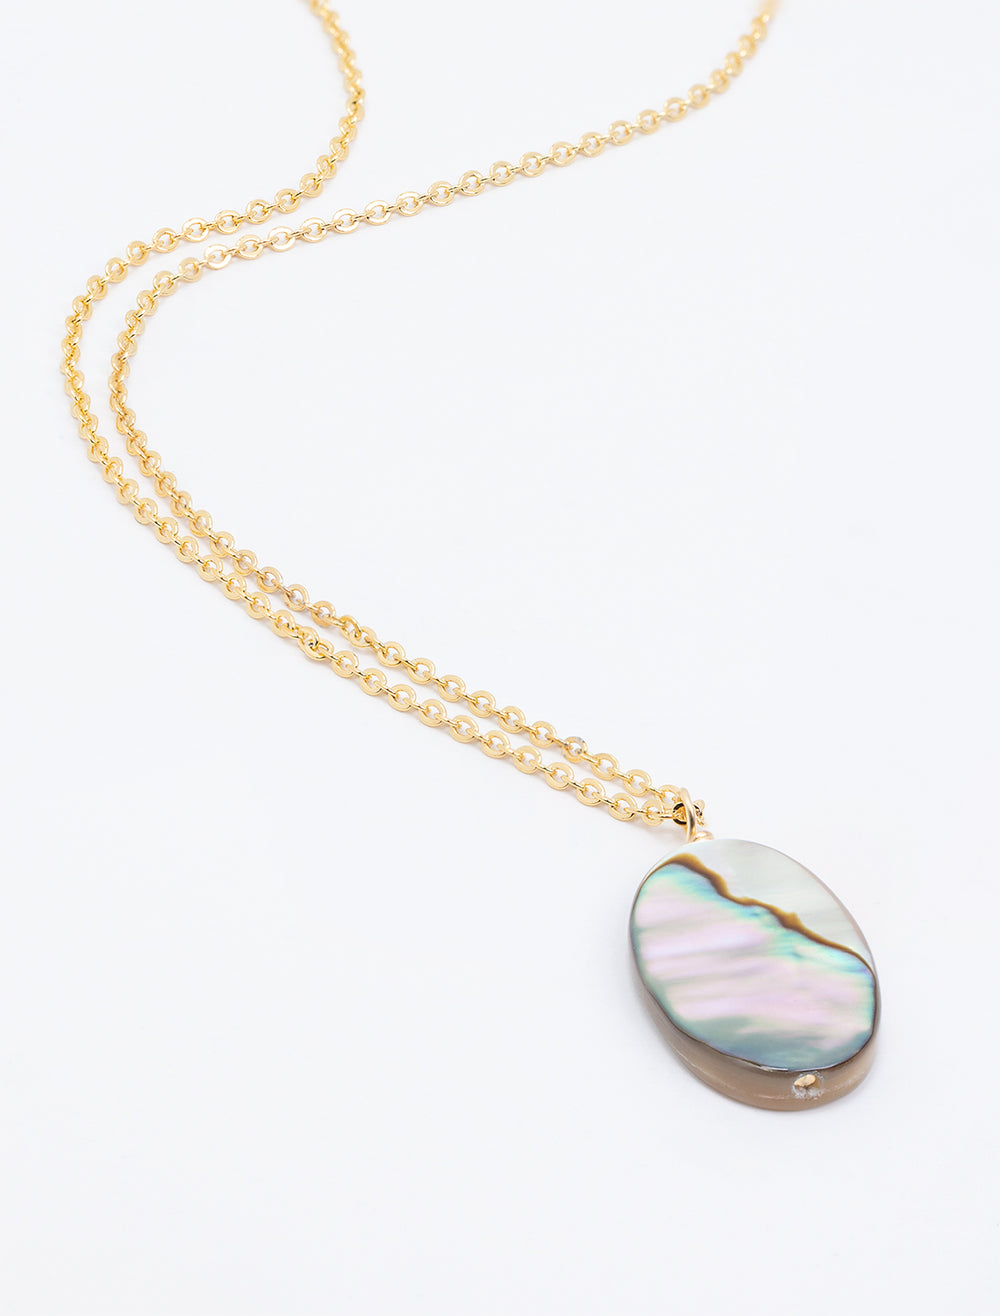 Close-up view of AV Max's oval abalone and mother of pearl pendant necklace.